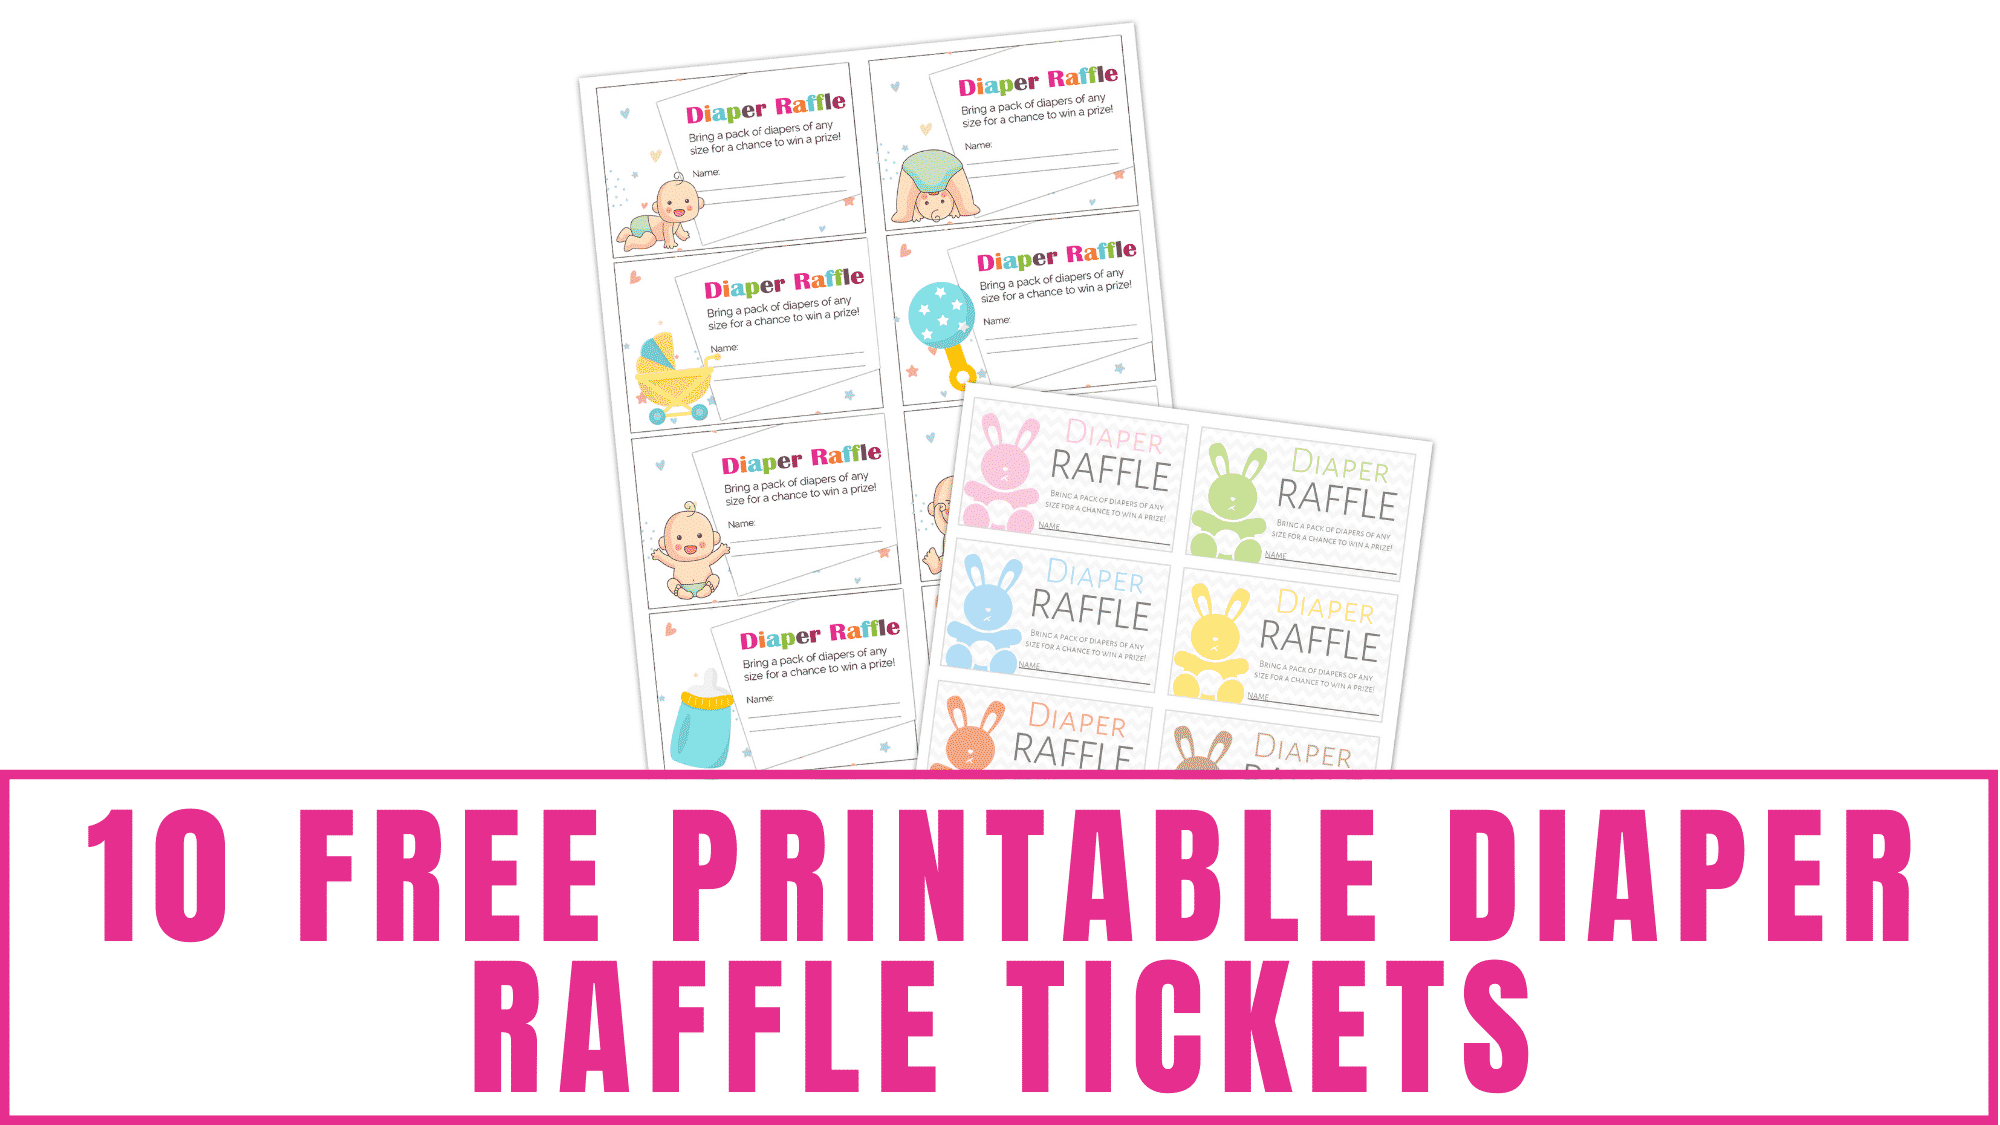 10 Free Printable Diaper Raffle Tickets - Freebie Finding Mom pertaining to Free Printable Baby Shower Diaper Raffle Tickets